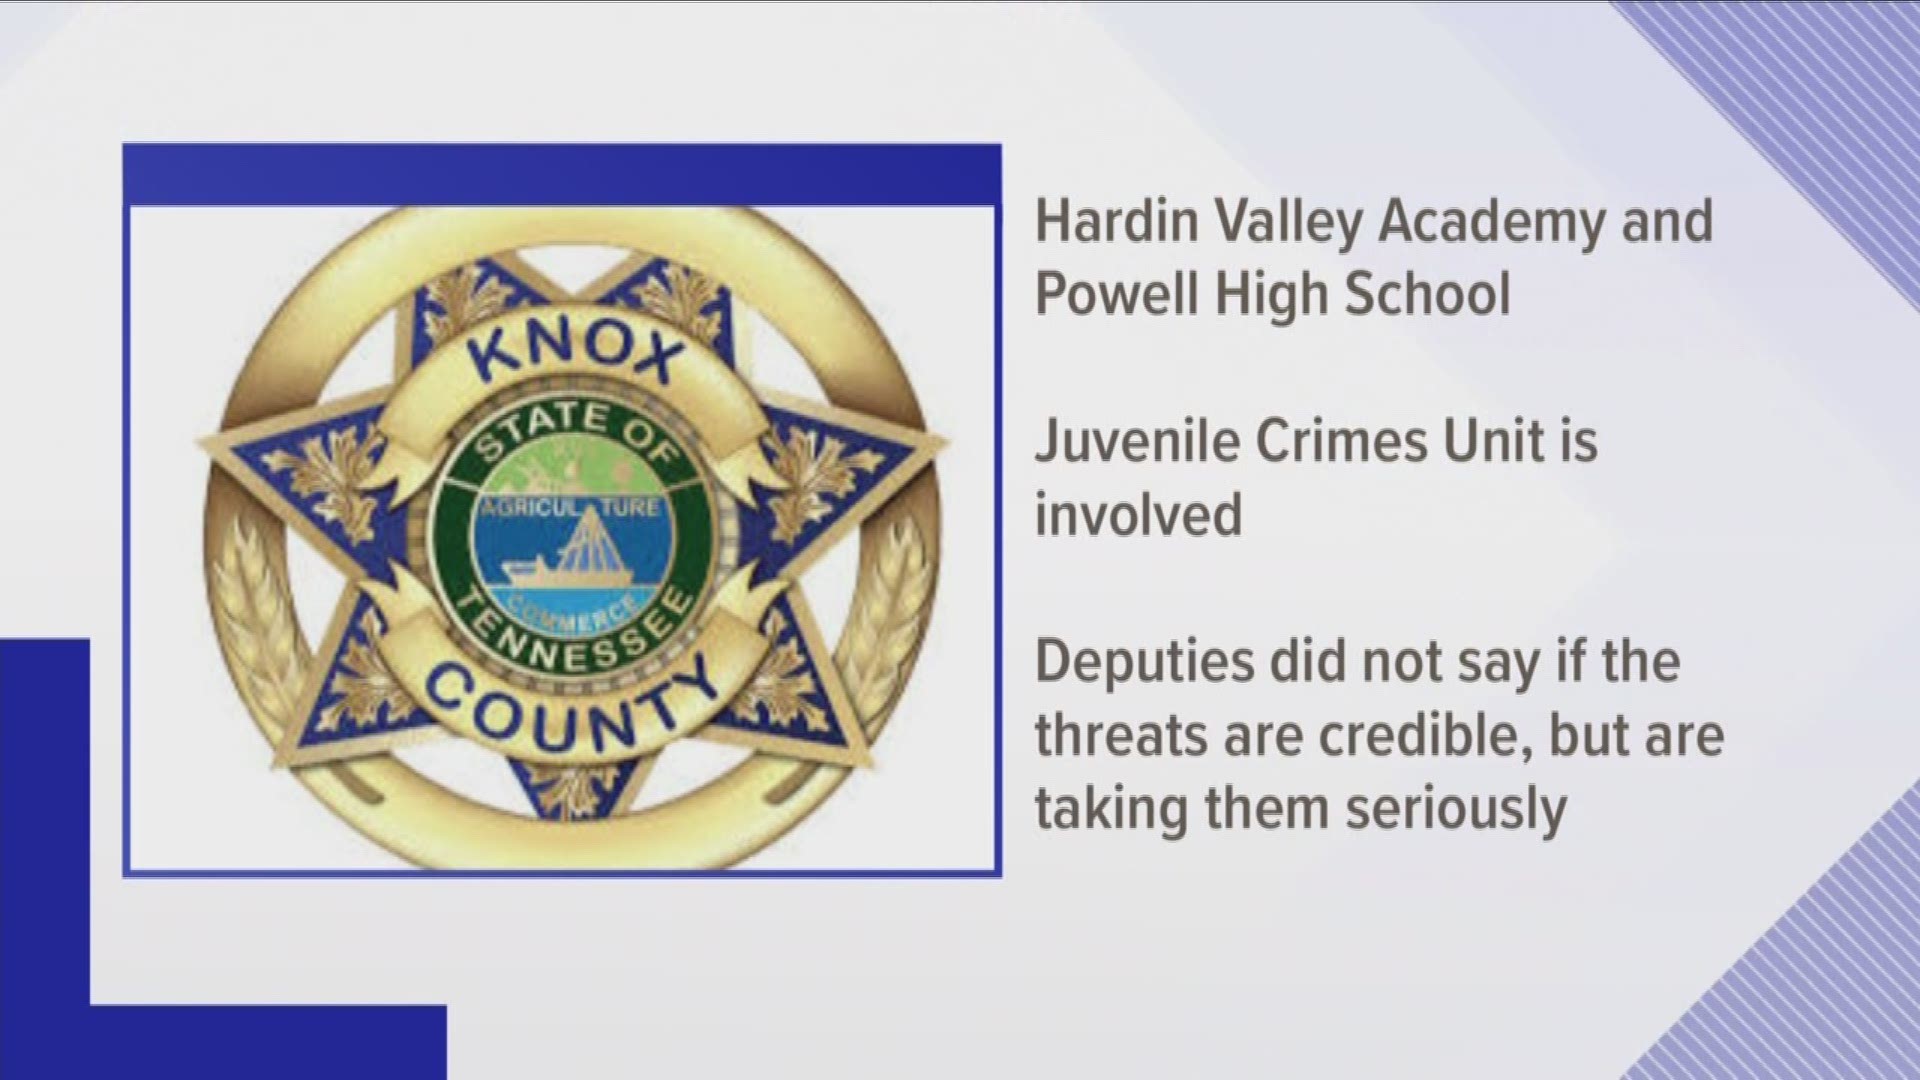 The Knox County Juvenile Crimes Unit is involved in the investigation and is working with officers with Knox County Schools.